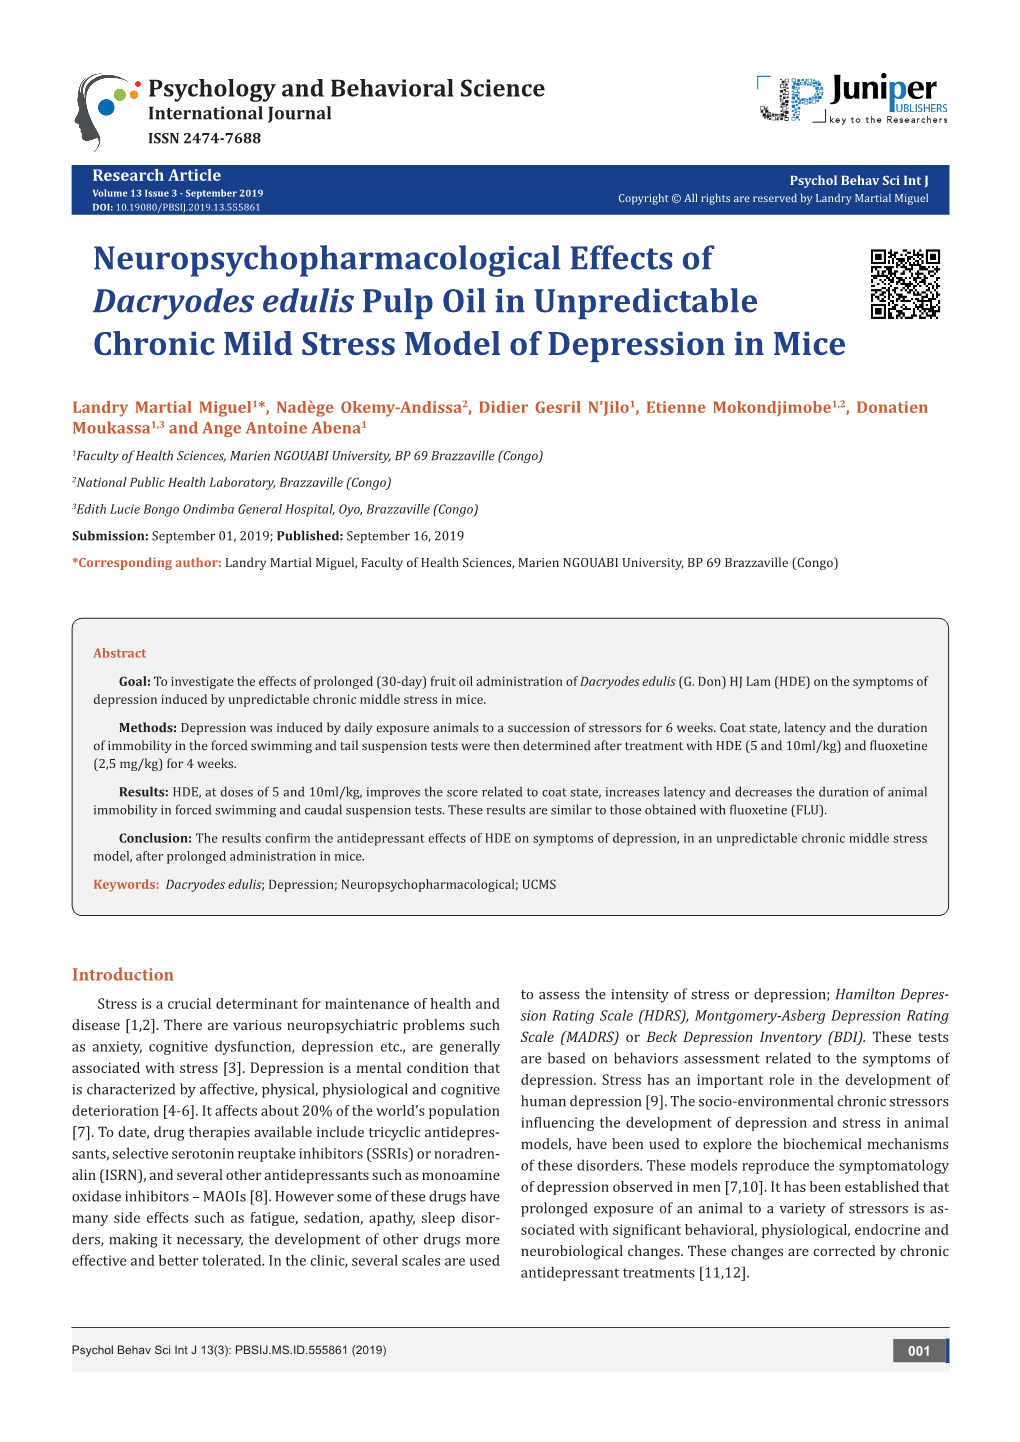 Neuropsychopharmacological Effects of Dacryodes Edulis Pulp Oil in Unpredictable Chronic Mild Stress Model of Depression in Mice